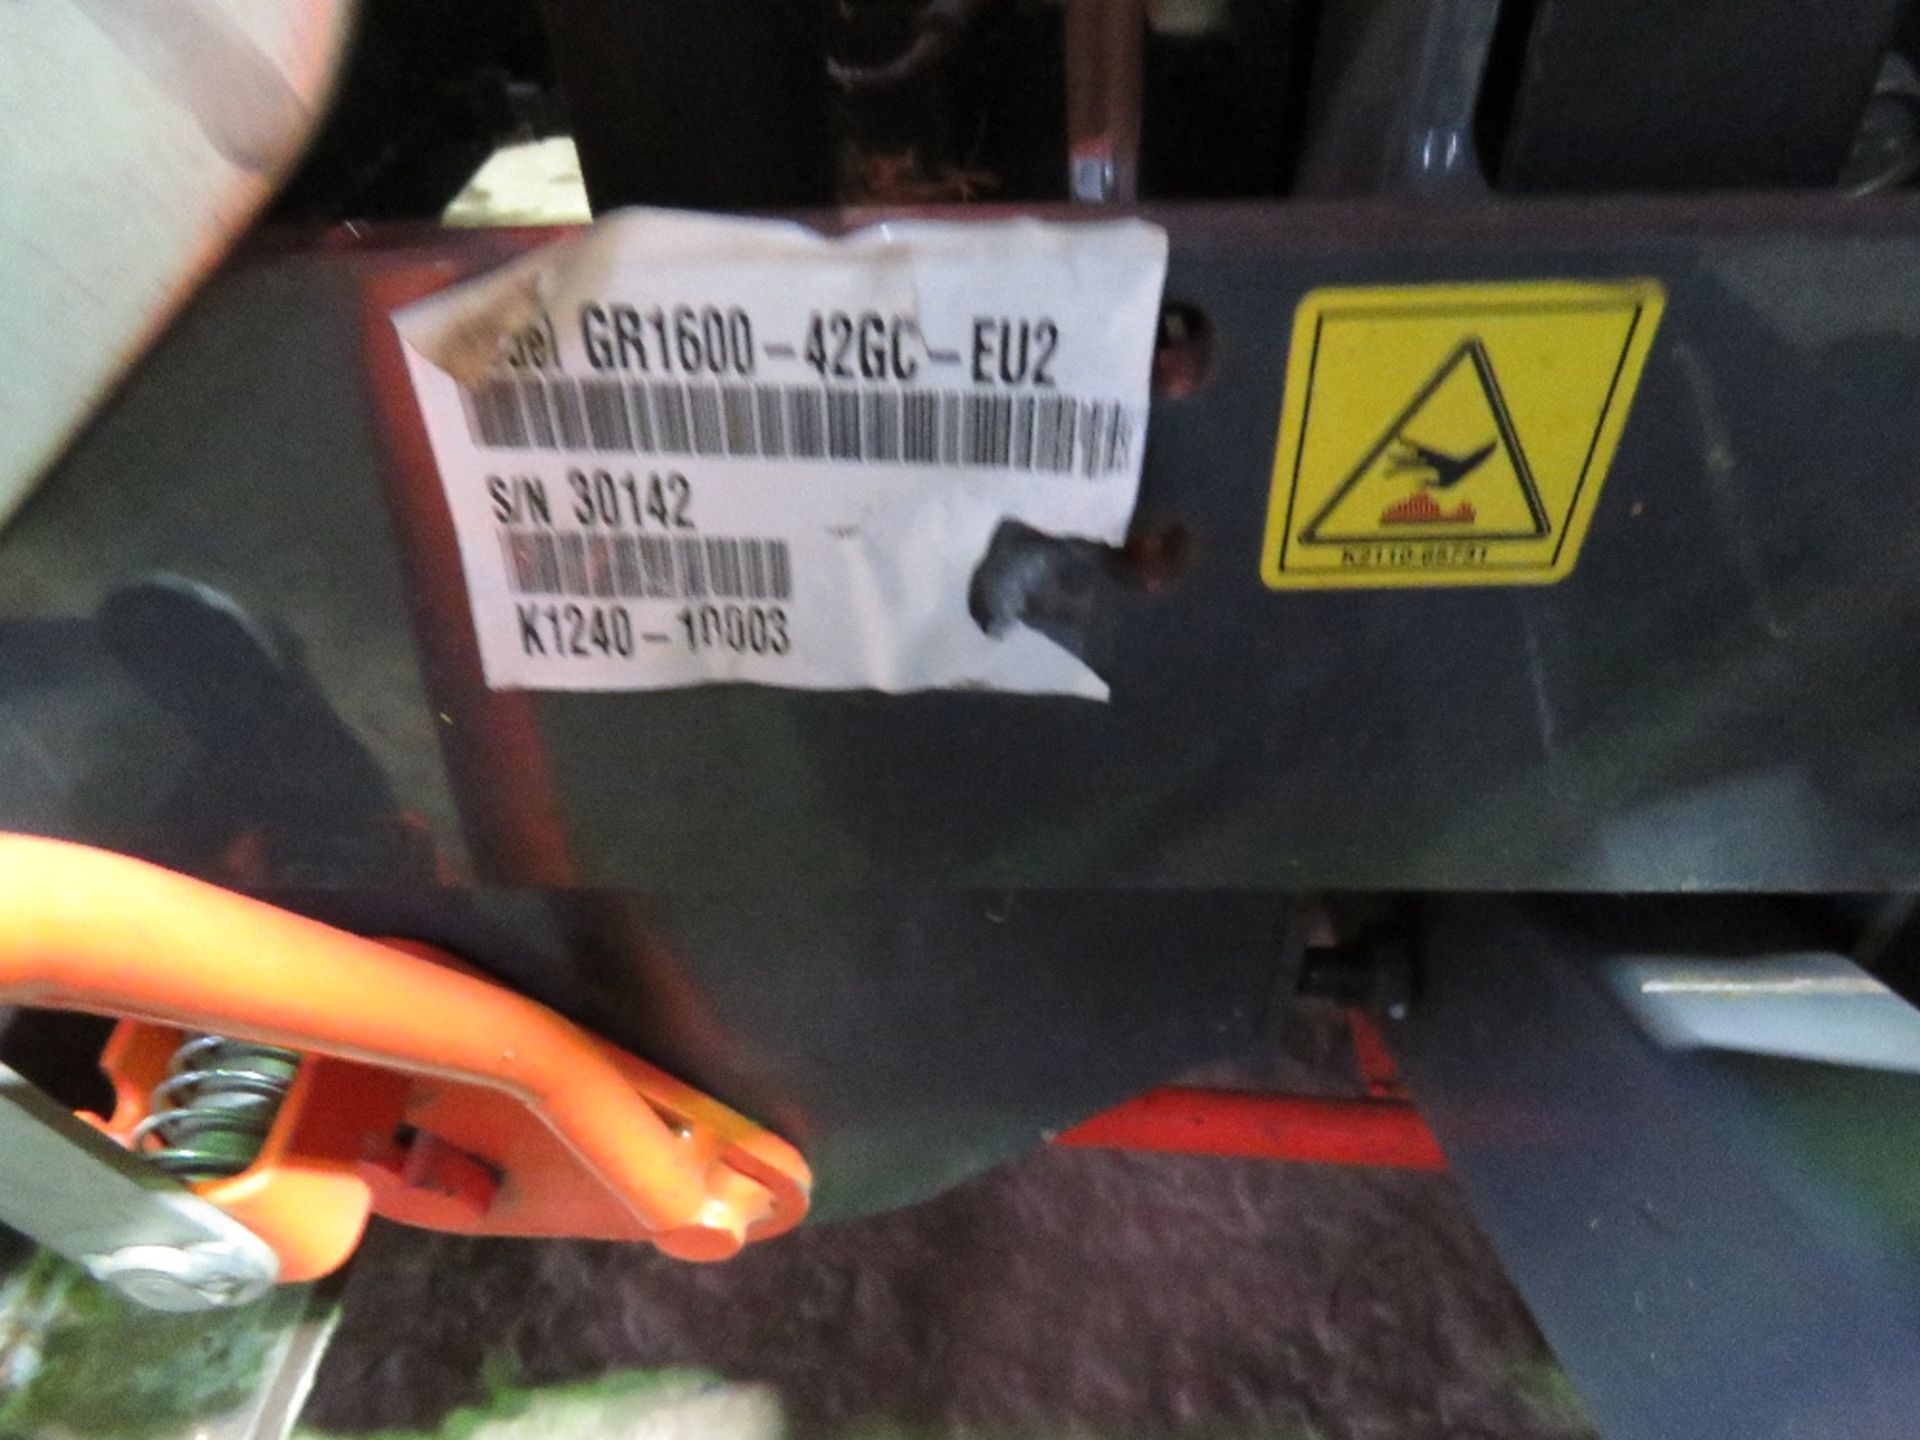 KUBOTA GR1600-II DIESEL RIDE ON MOWER WITH REAR COLLECTOR PLUS DISCHARGE CHUTE. SN:30142. WHEN TESTE - Image 13 of 14